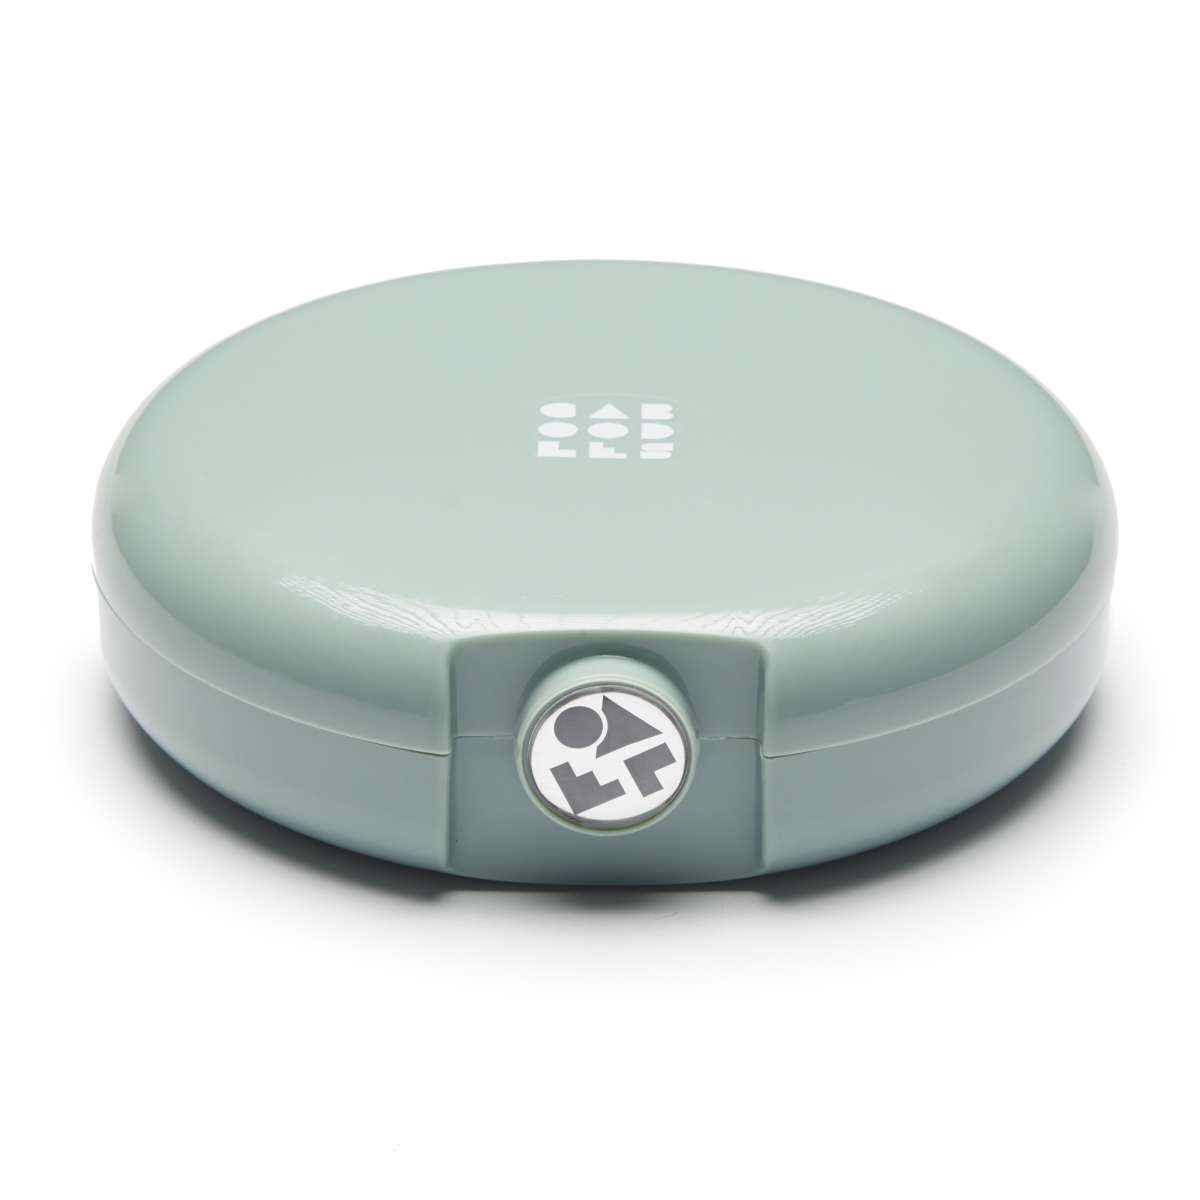 Cab5860s1 Cosmic Cosmetic Compact, Sage